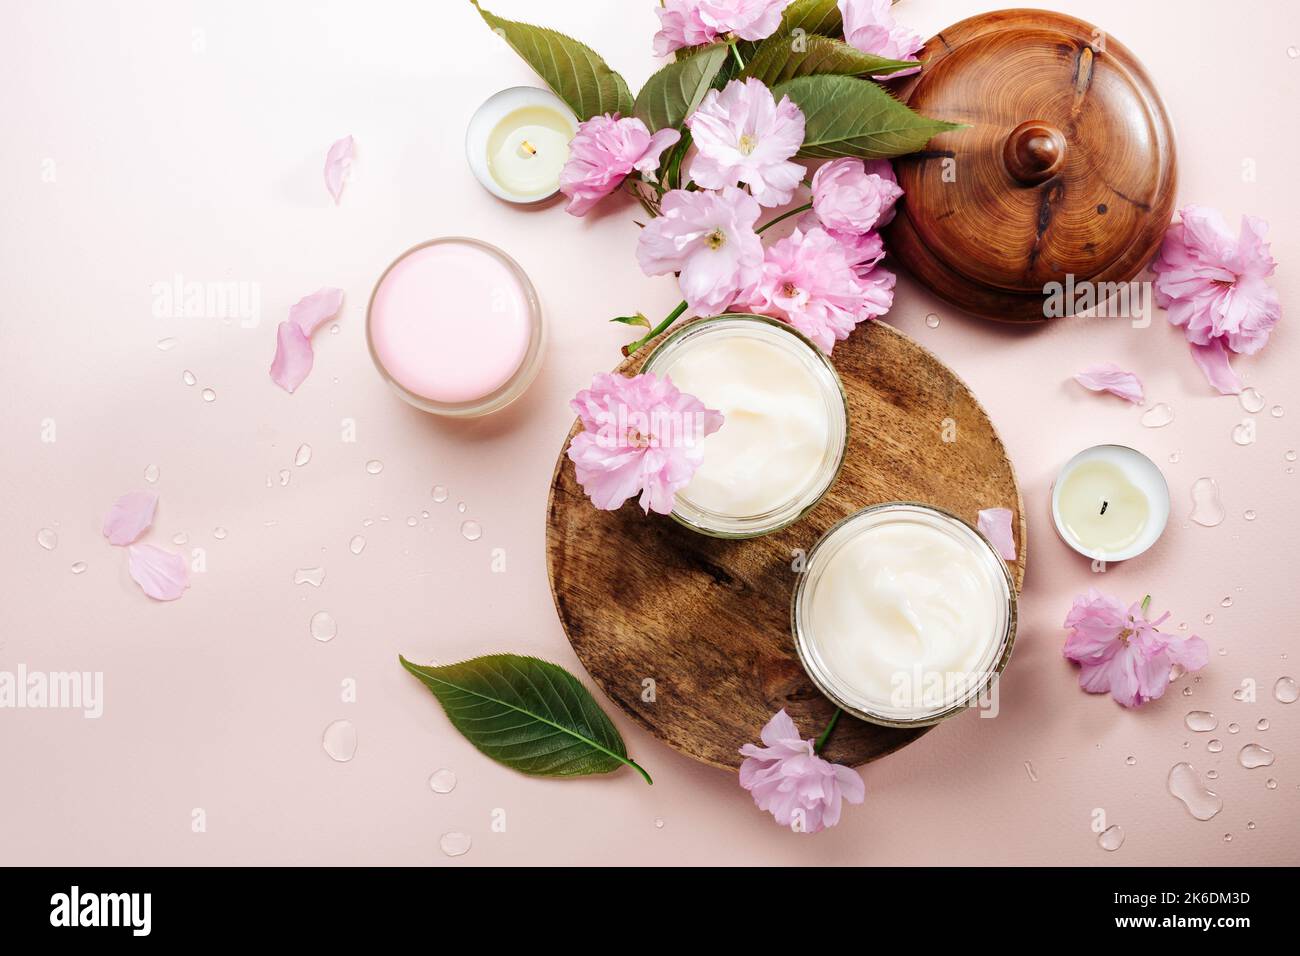 Skin care products, spa treatments, top view. Stock Photo